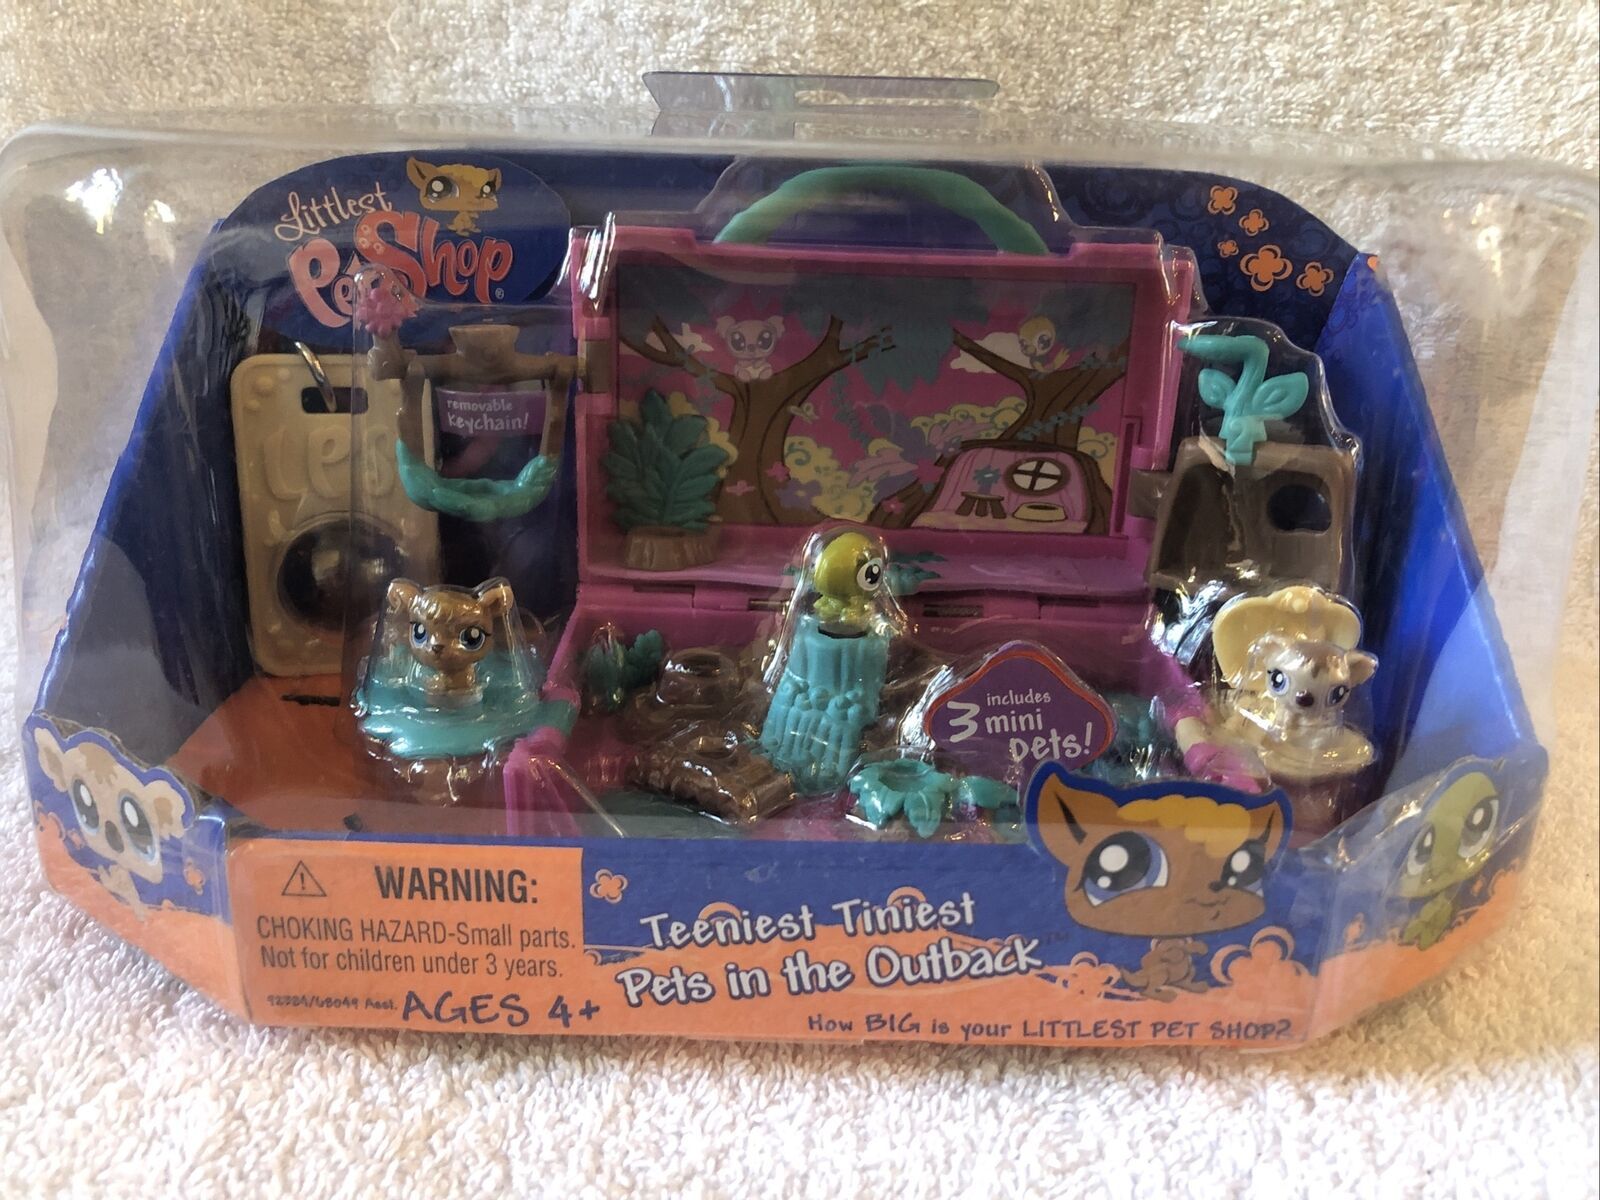 Year 2007 Littlest Pet Shop LPS Display and Play Series Playset